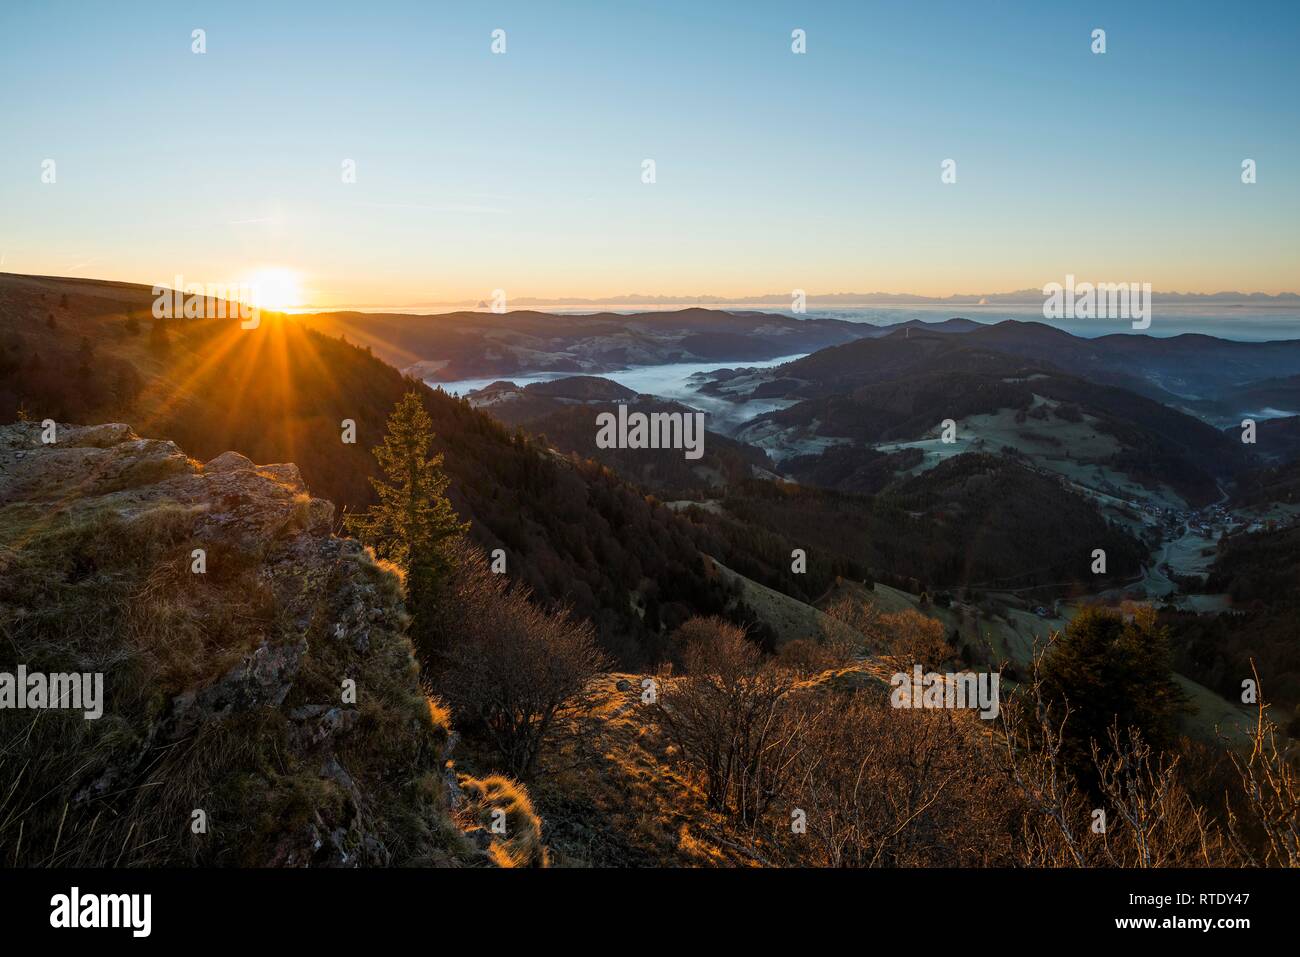 View from Belchen into Wiesental valley, morning mood with fog, Black Forest, Baden-Württemberg, Germany Stock Photo